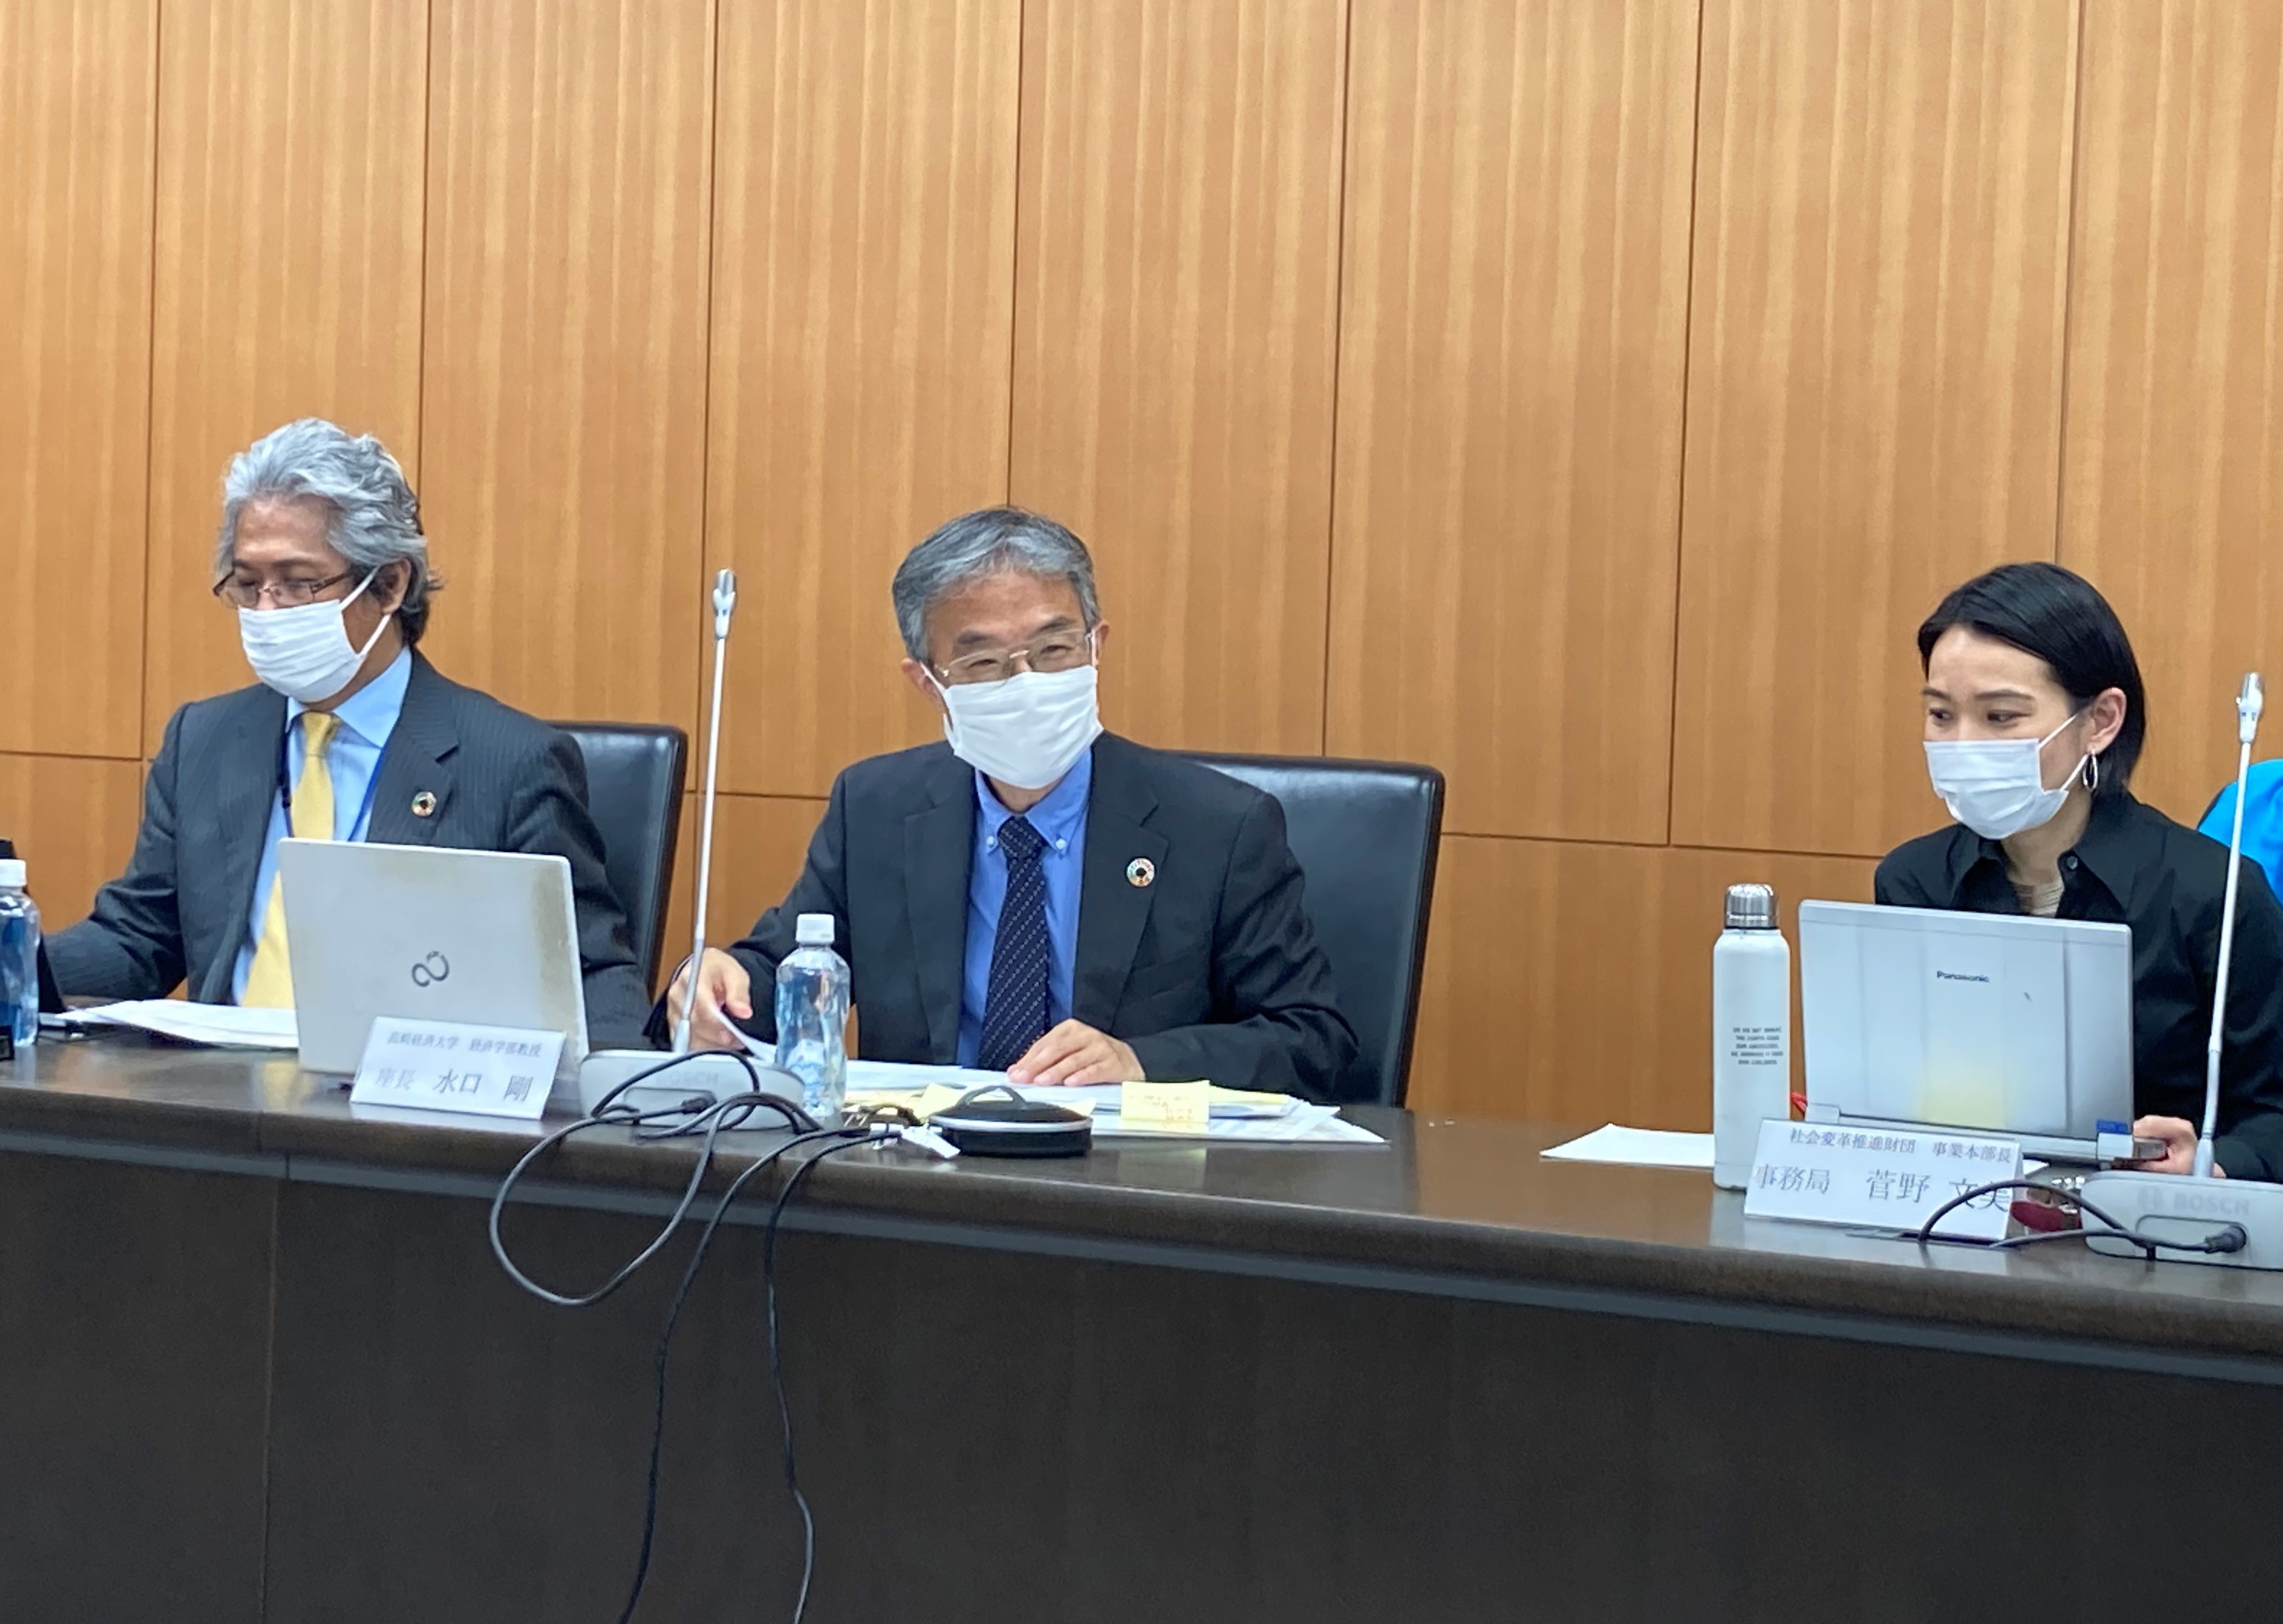 GSG-NAB Japan and Financial Services Agency of Japan co-hosted the 5th "Impact Investing Roundtable " on April 15.